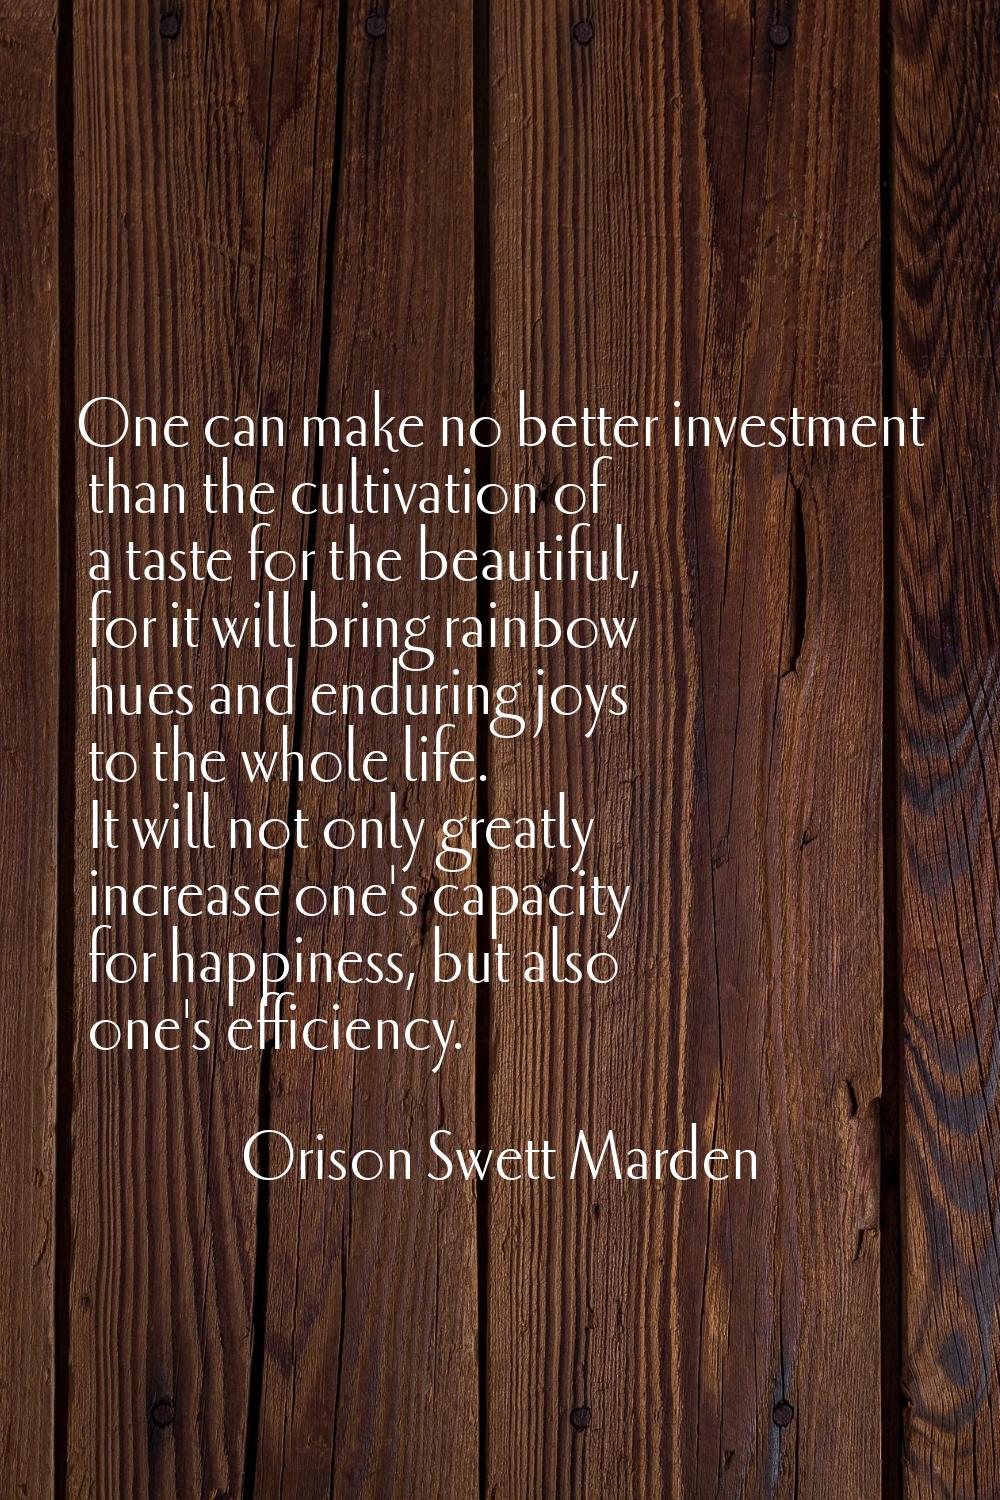 One can make no better investment than the cultivation of a taste for the beautiful, for it will br